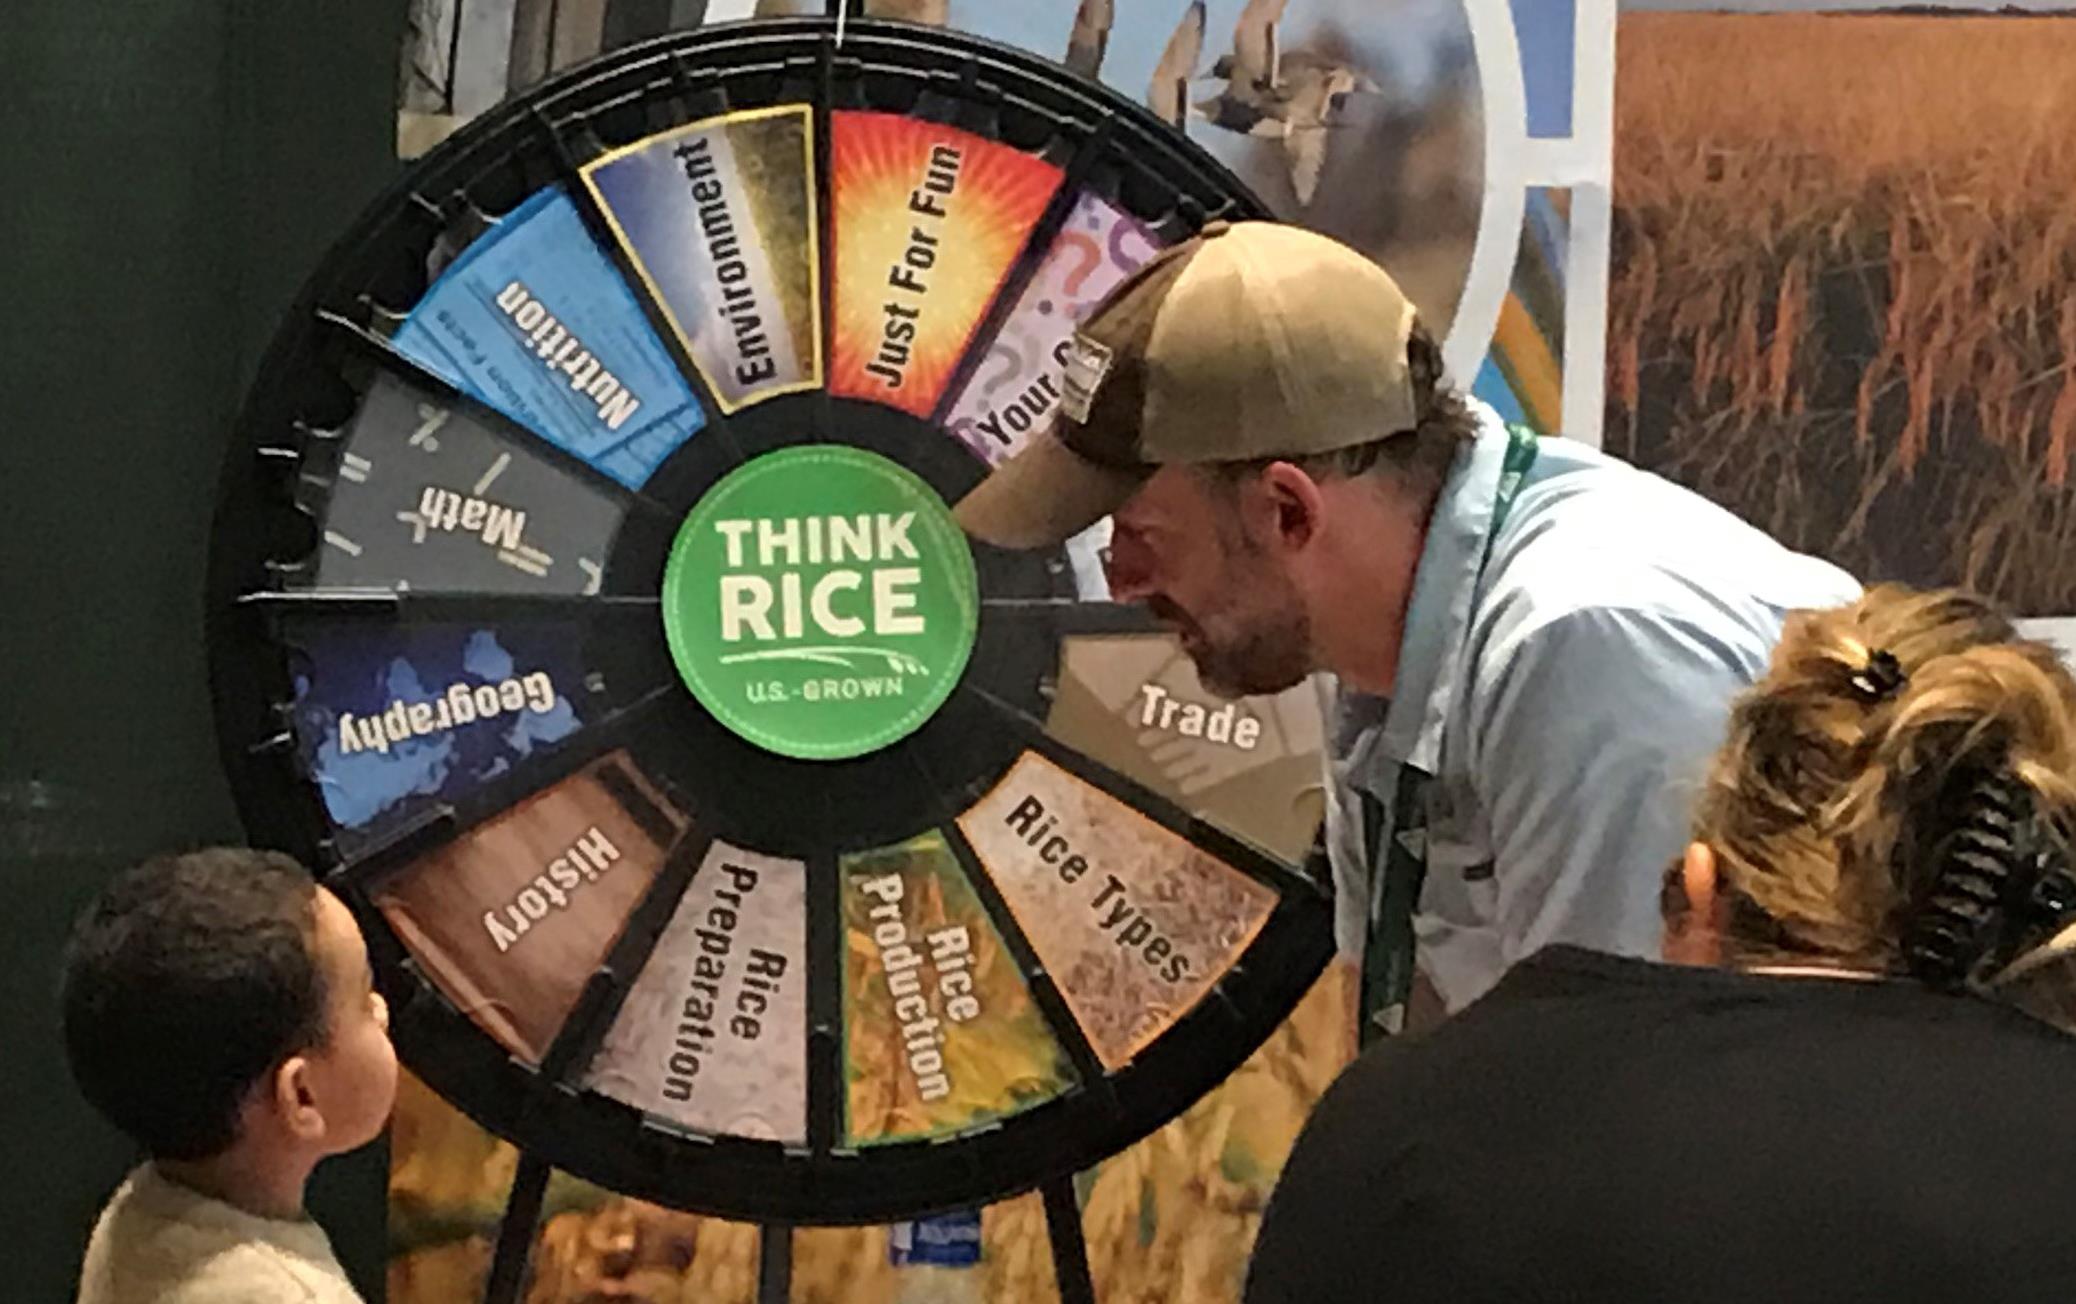 Children line up for their chance at the Think Rice trivia wheel sitting on a table draped in an American flag tablecloth, man wearing ballcap leans over to talk to small boy getting ready to spin the wheel